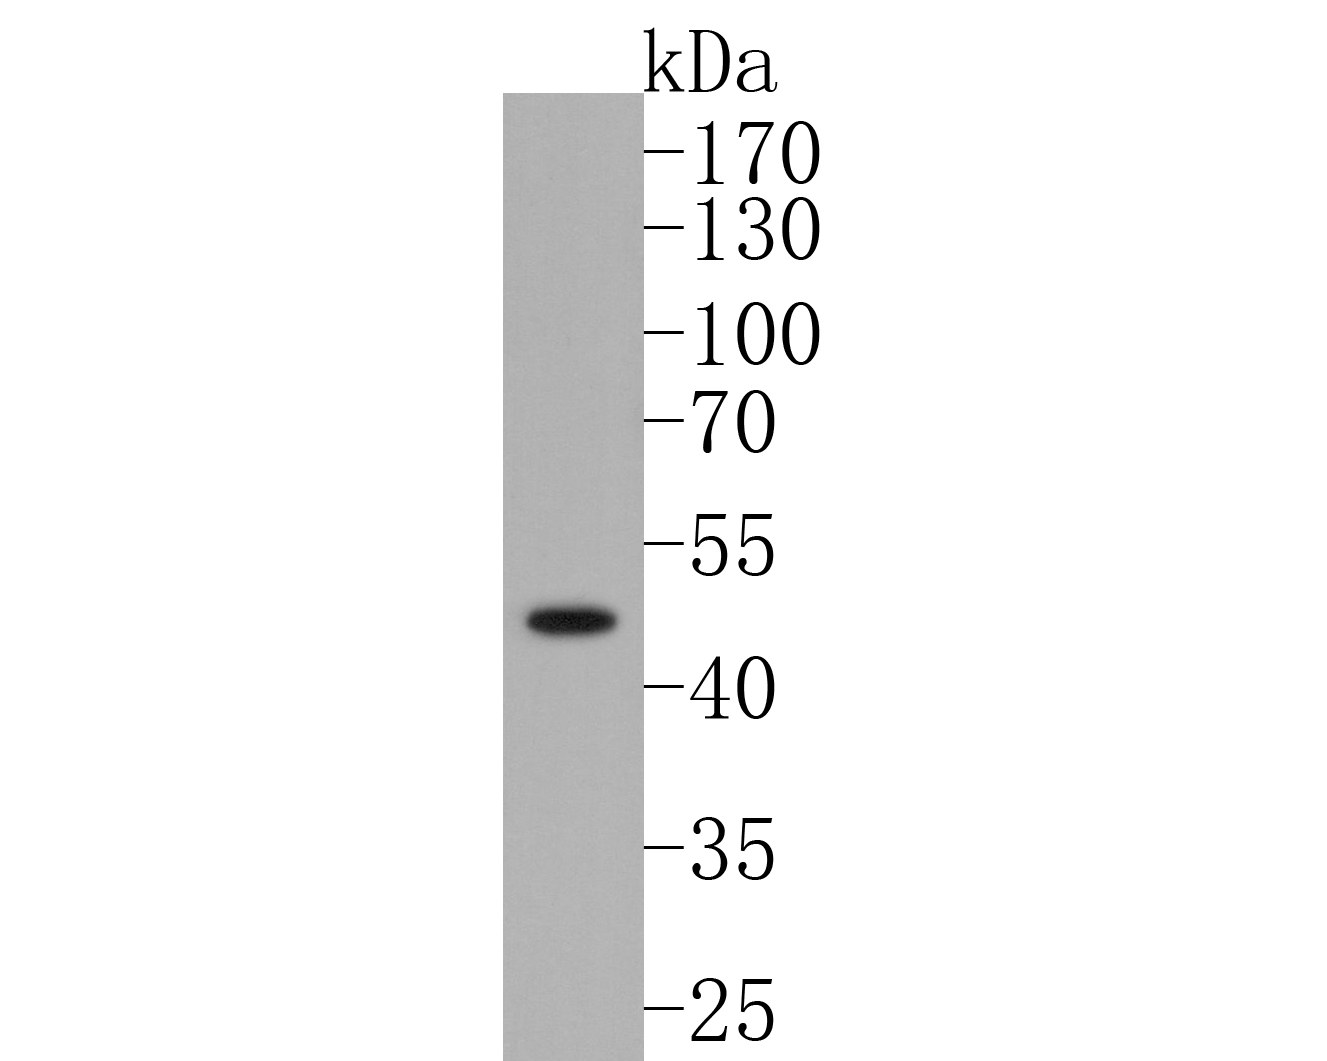 Western blot analysis of Cytokeratin 15 on A431 cell lysates. Proteins were transferred to a PVDF membrane and blocked with 5% BSA in PBS for 1 hour at room temperature. The primary antibody (ET1609-54, 1/500) was used in 5% BSA at room temperature for 2 hours. Goat Anti-Rabbit IgG - HRP Secondary Antibody (HA1001) at 1:5,000 dilution was used for 1 hour at room temperature.